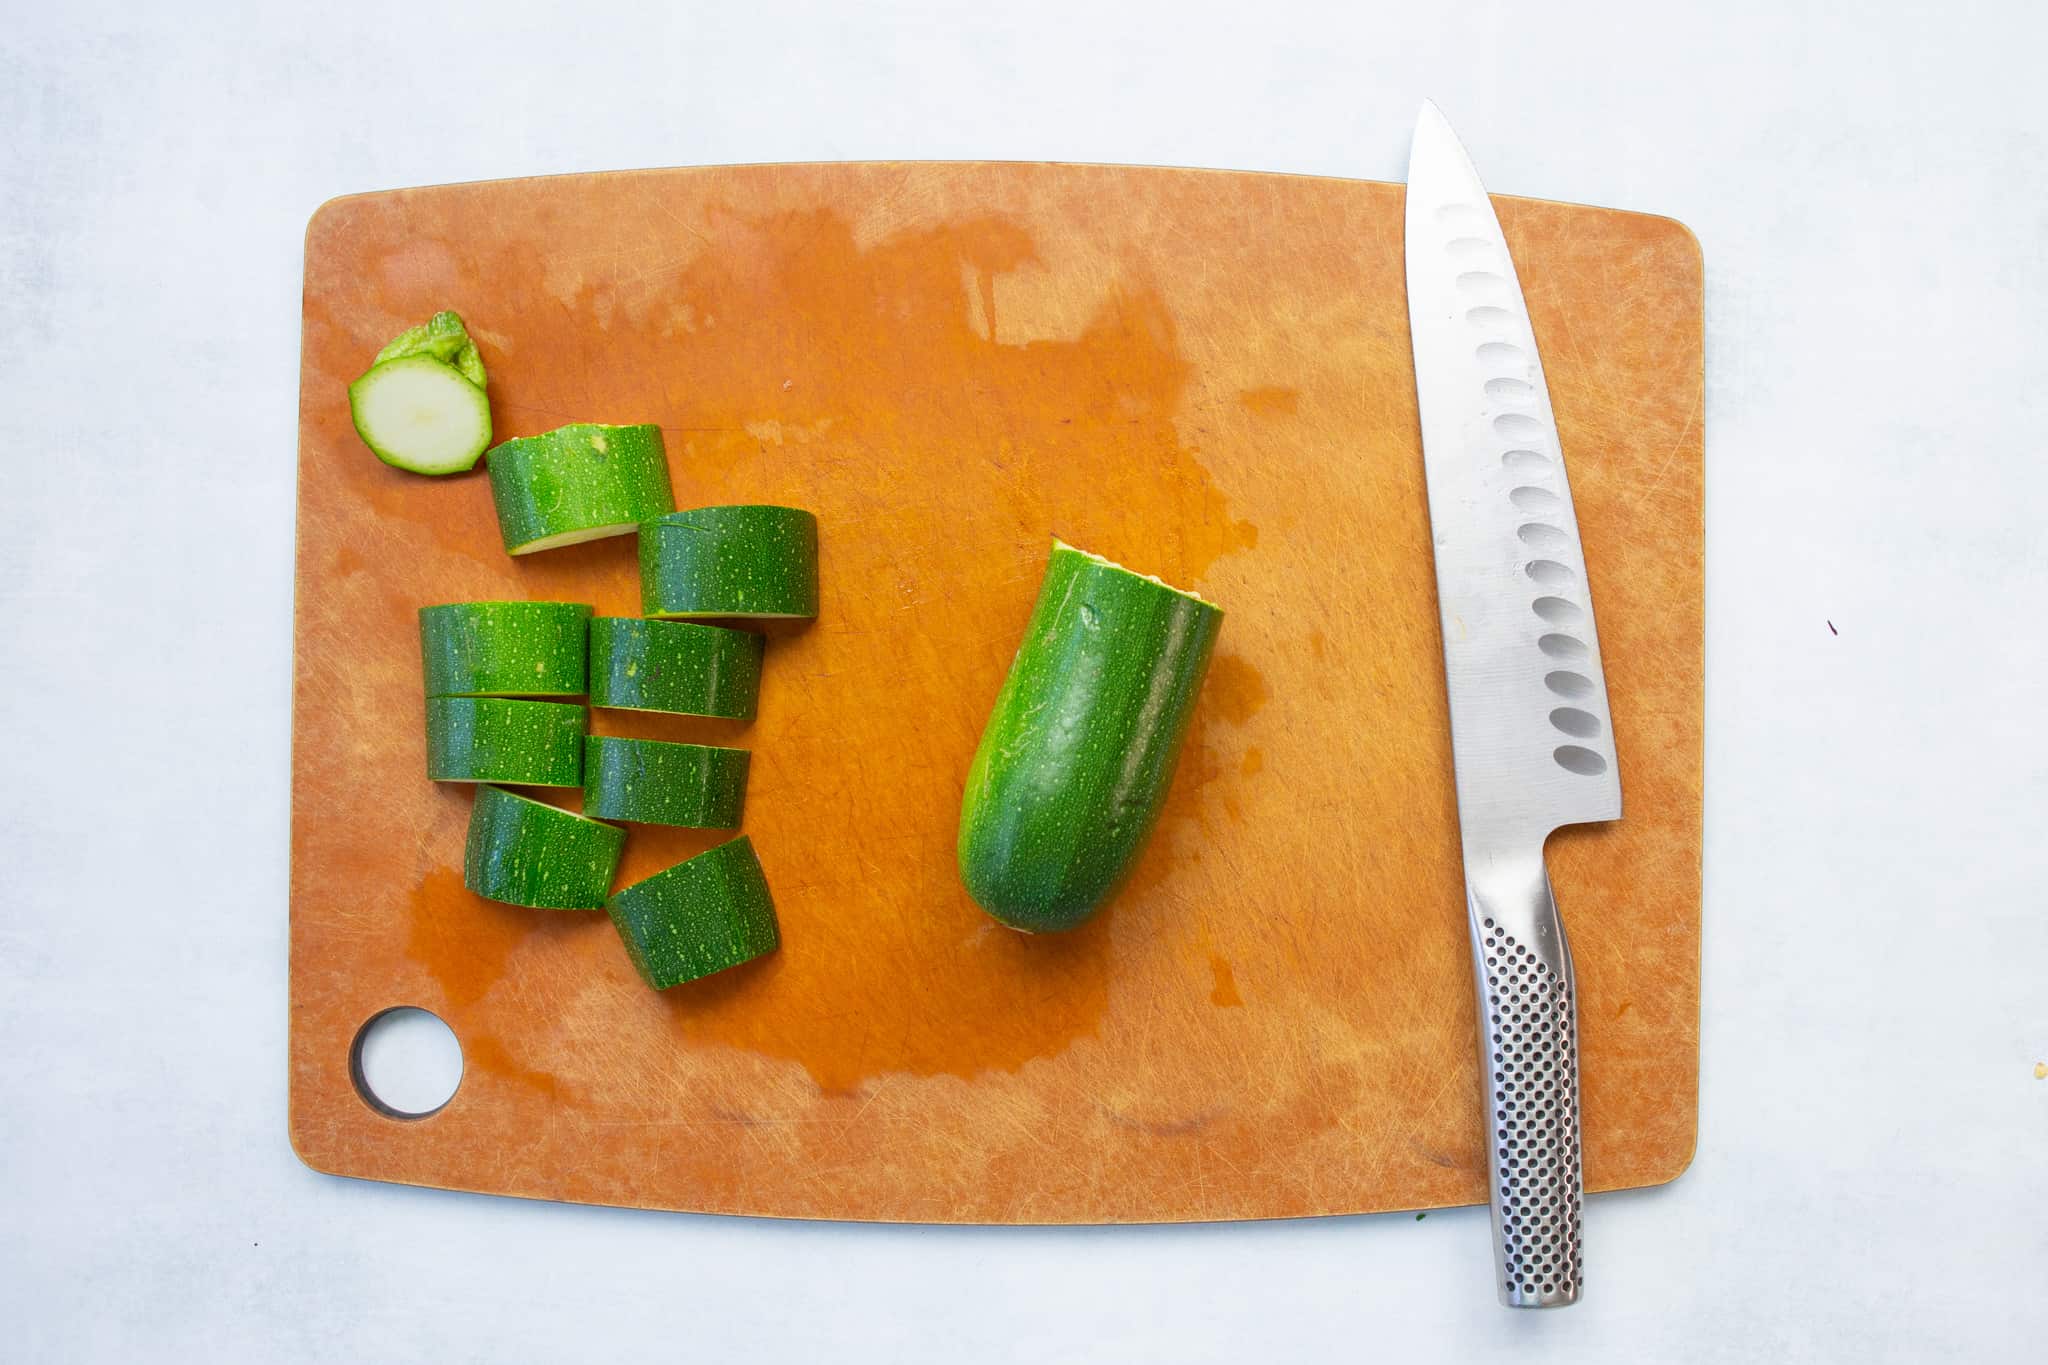 start with the zucchini and cut off the stem end